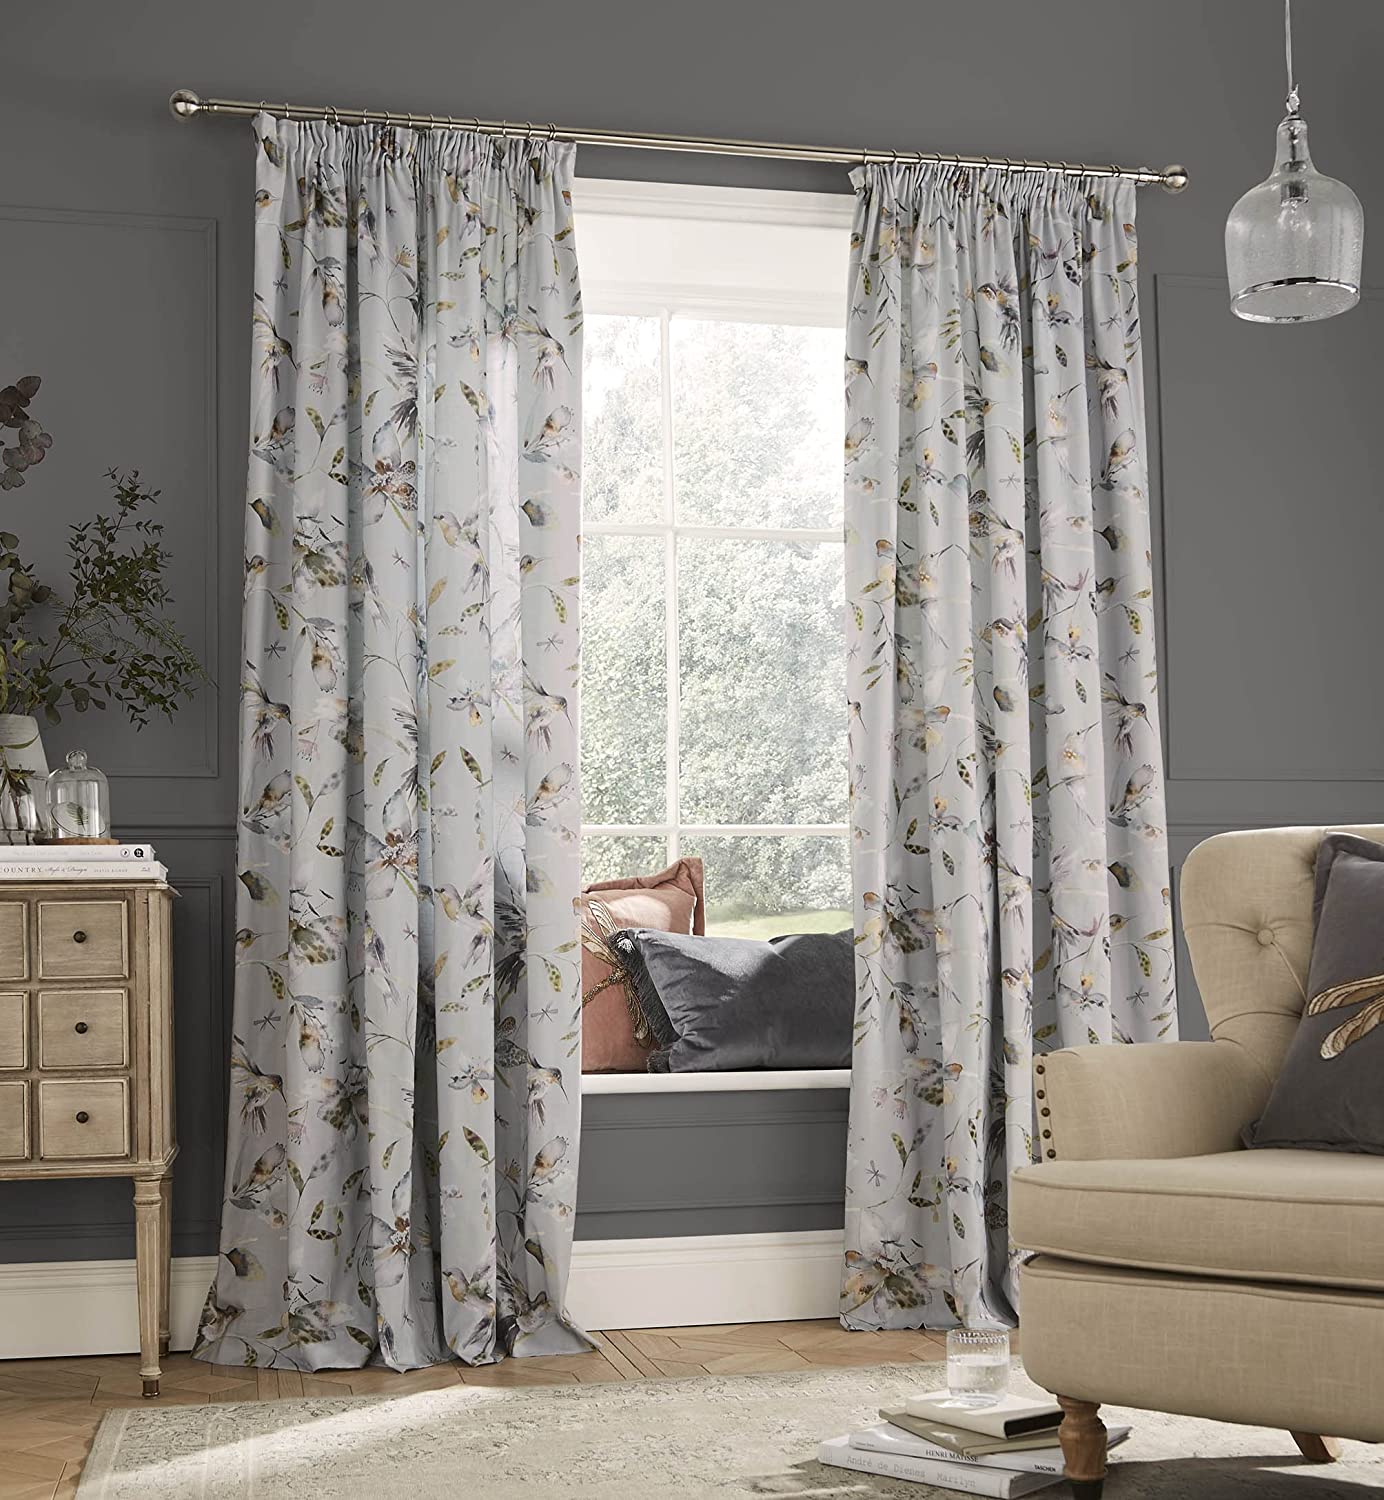 Voyage Maison Curtains Floral Ready Made Curtains Pencil Pleat Lined Curtains 